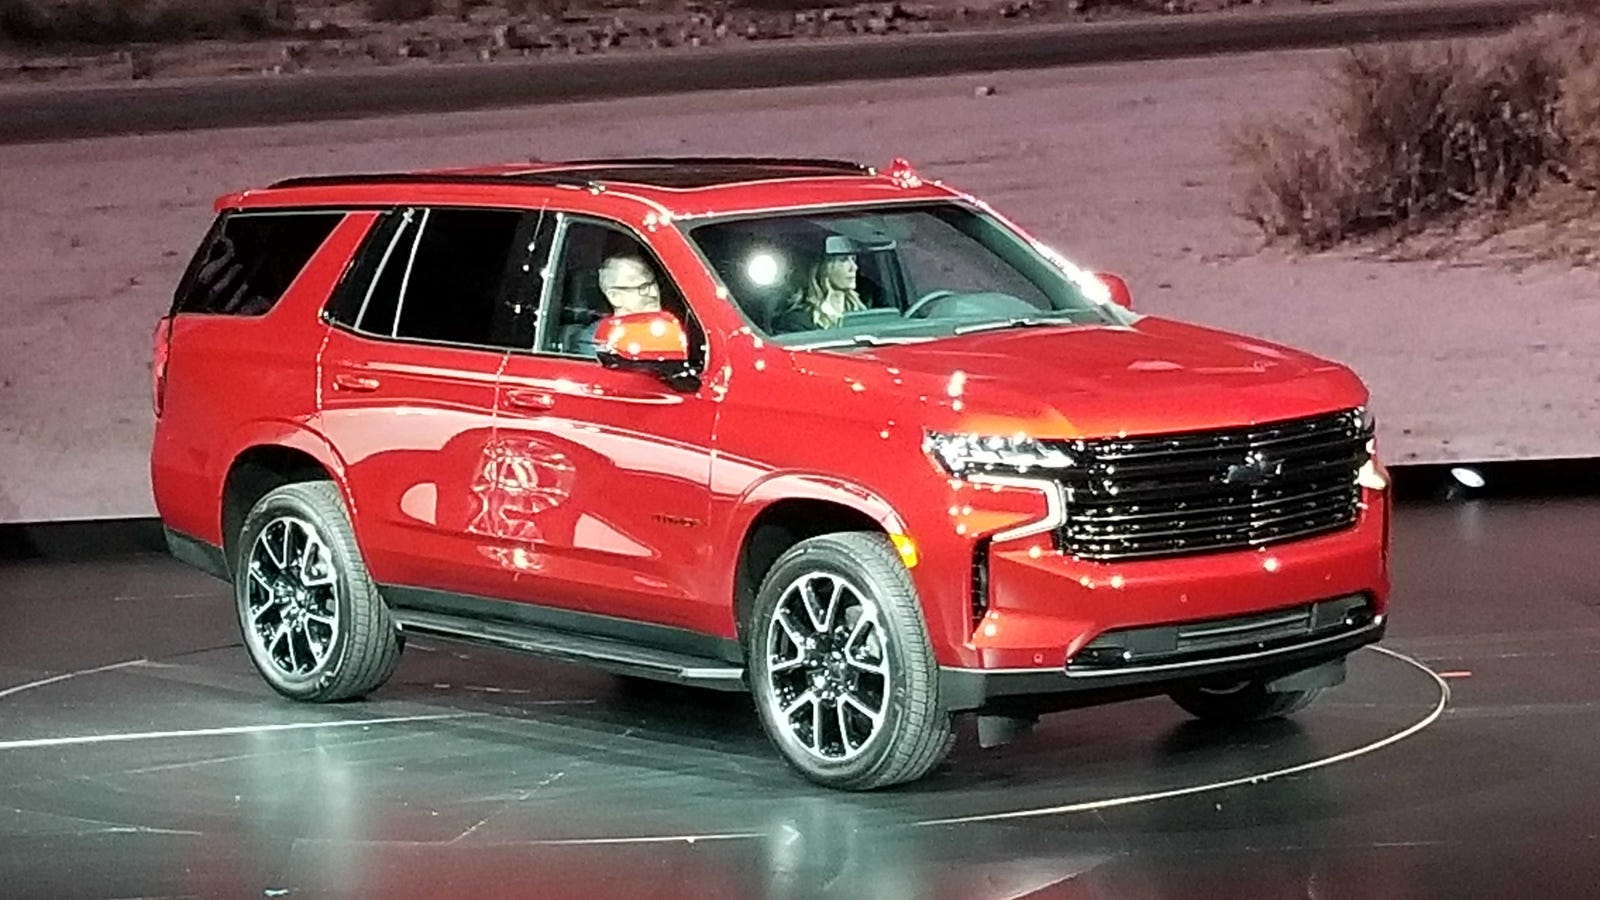 2021 Chevy Tahoe Gets New Look and an Independent Rear 